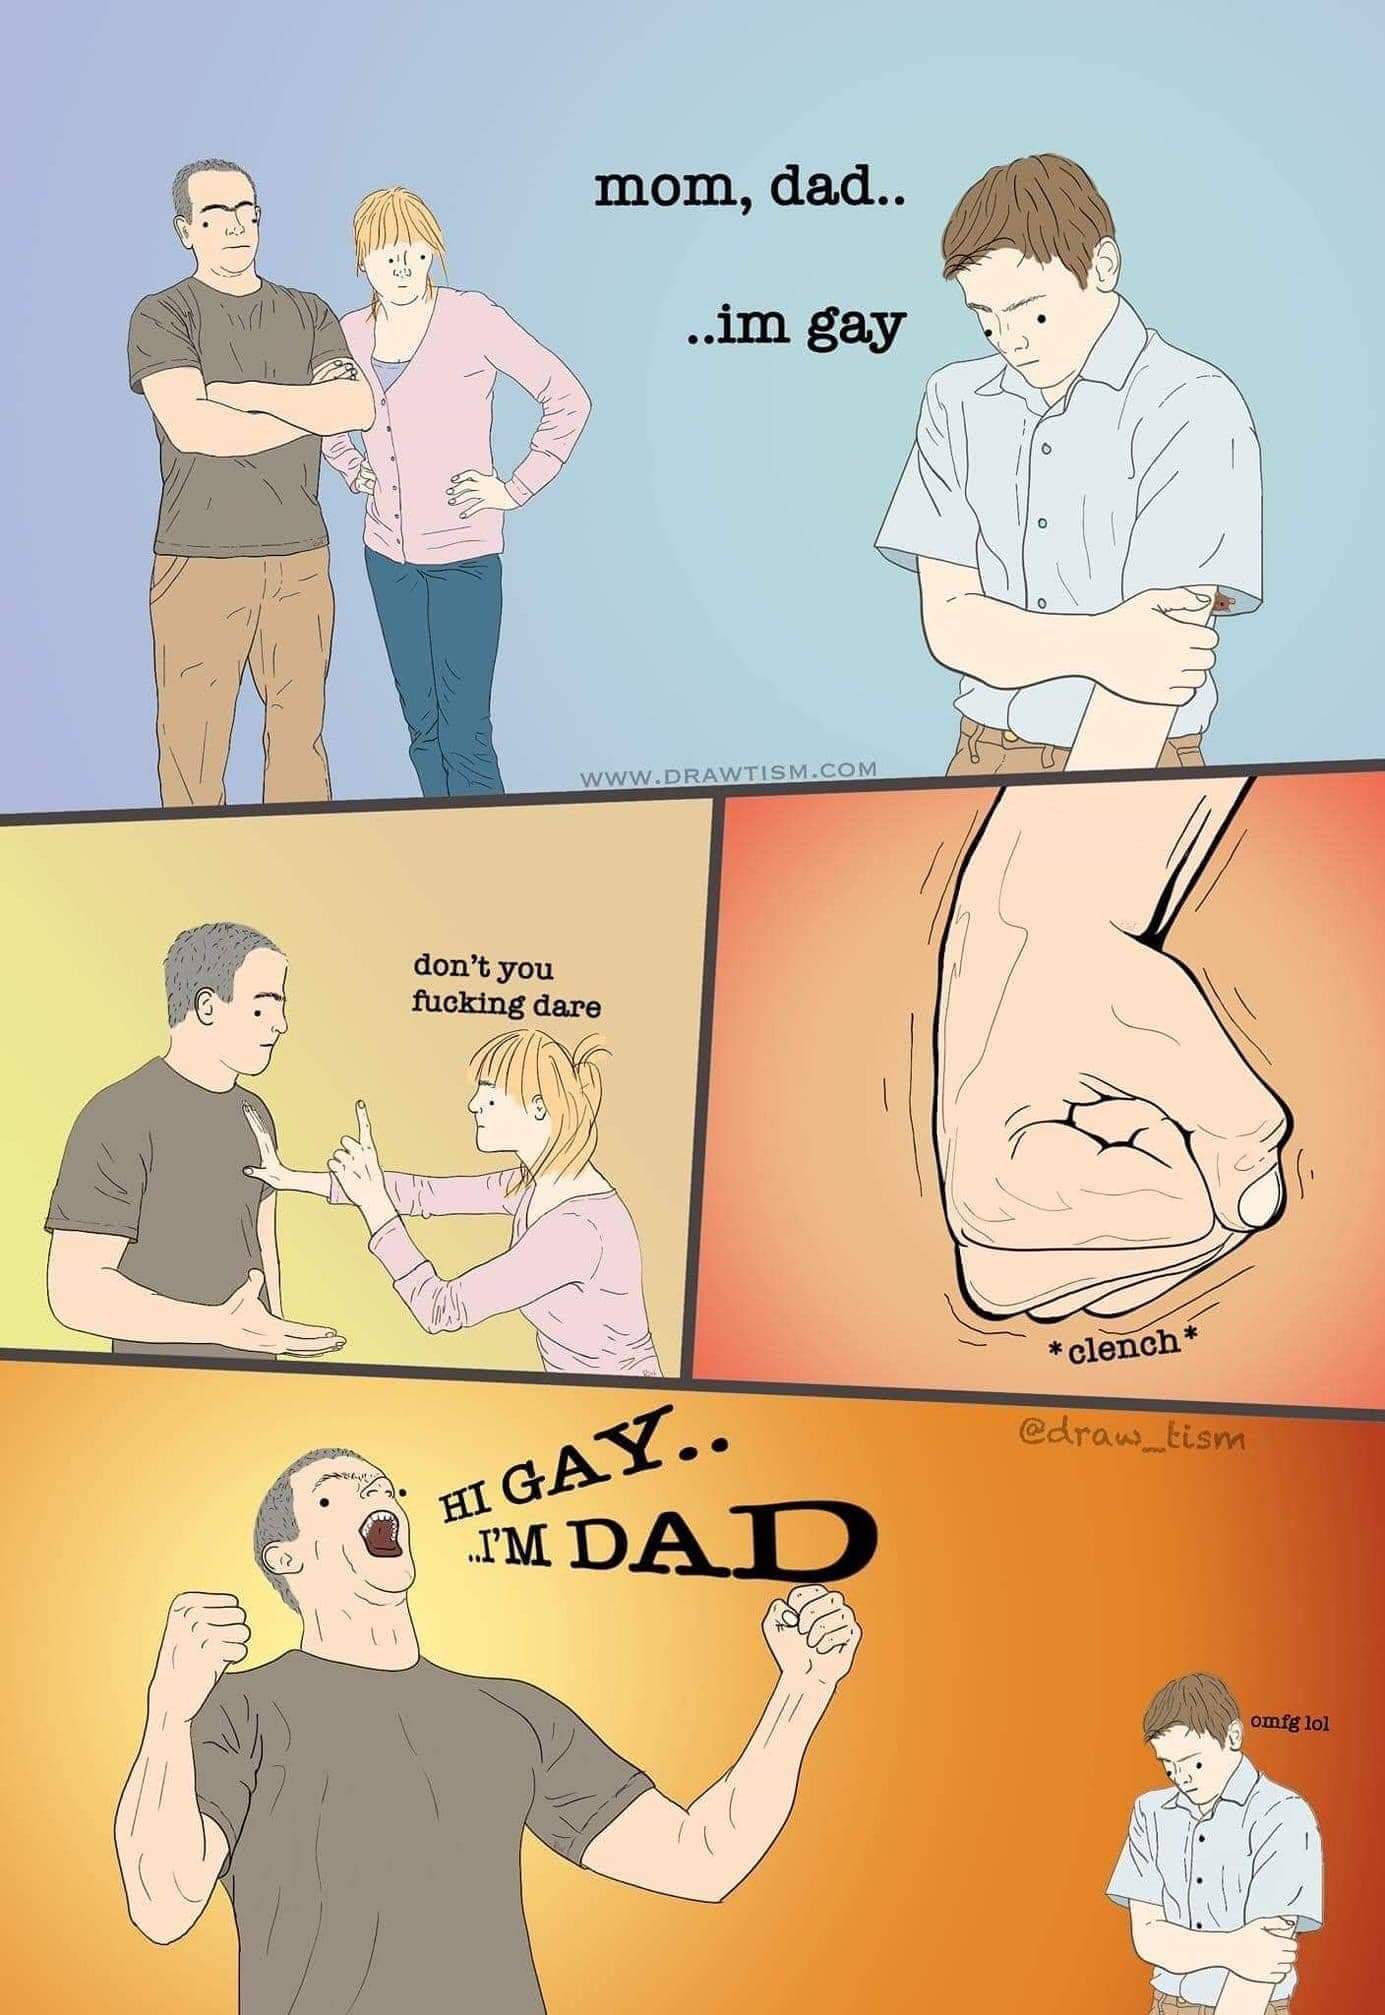 Every Dad knows - meme